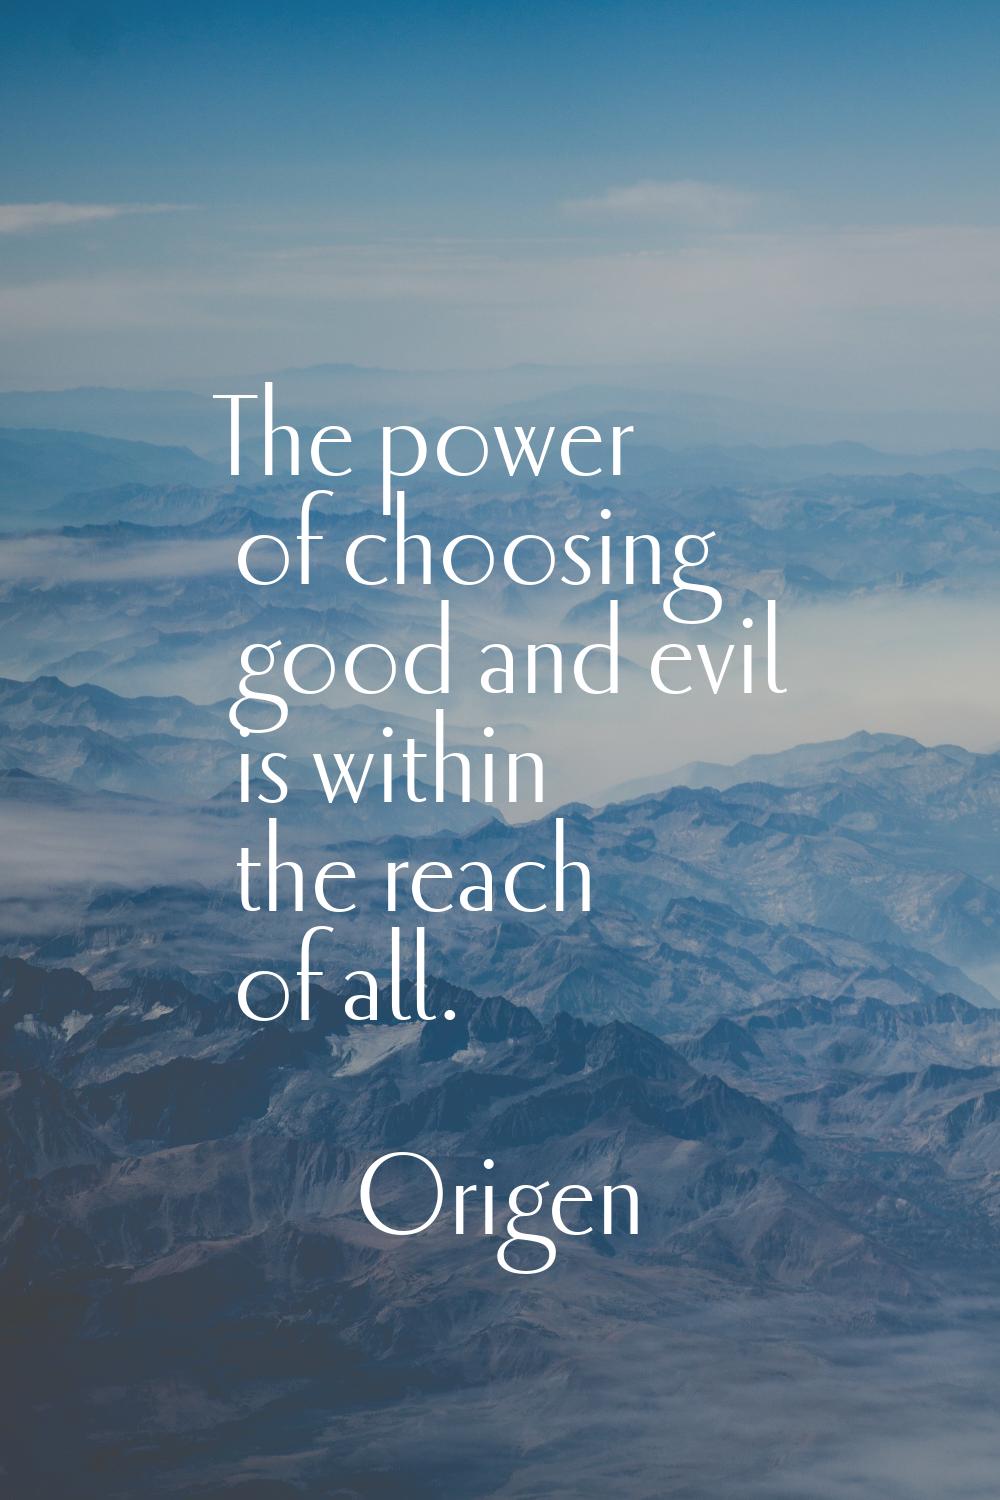 The power of choosing good and evil is within the reach of all.